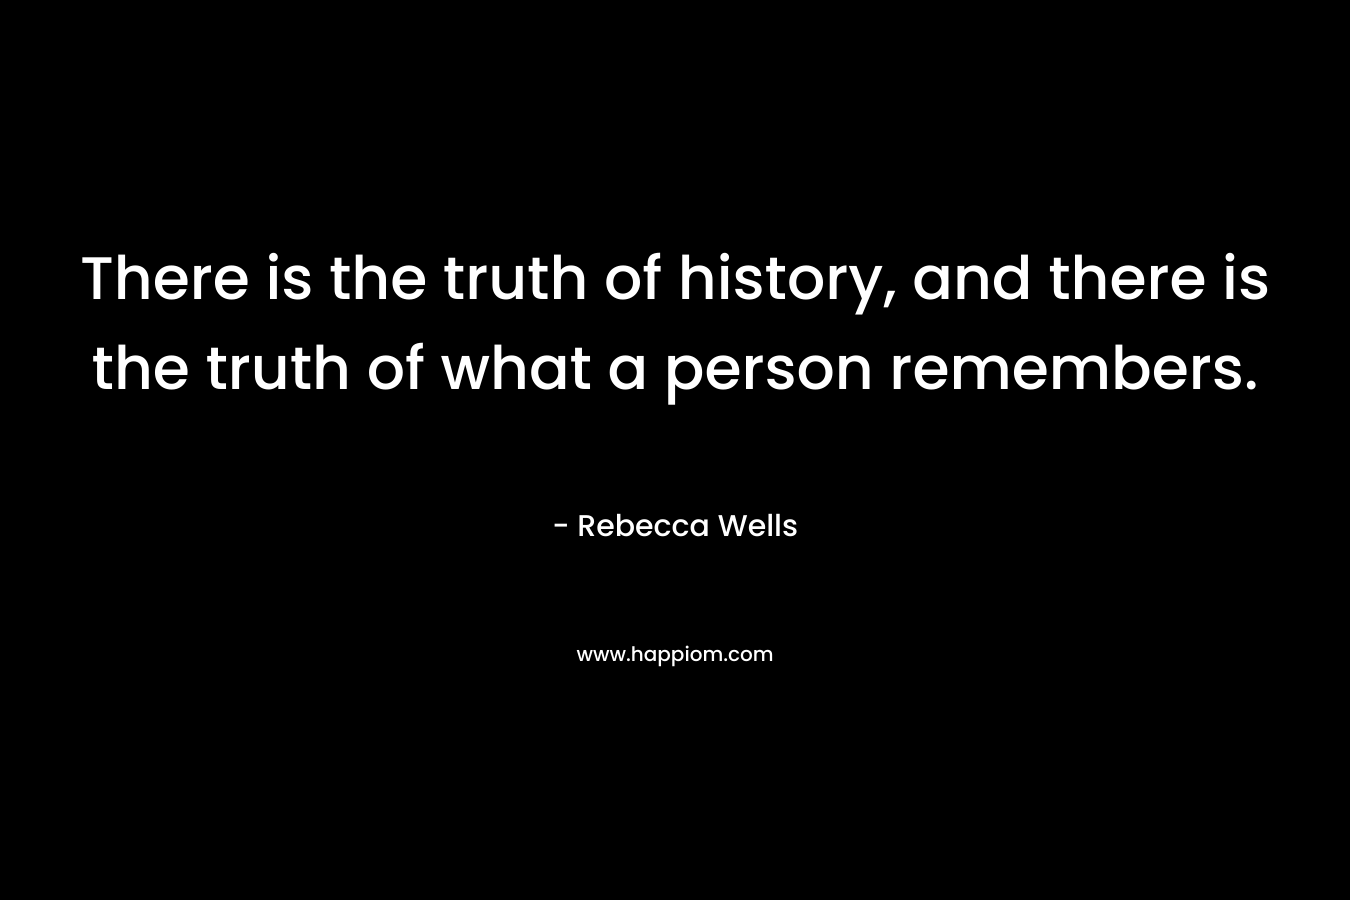 There is the truth of history, and there is the truth of what a person remembers.